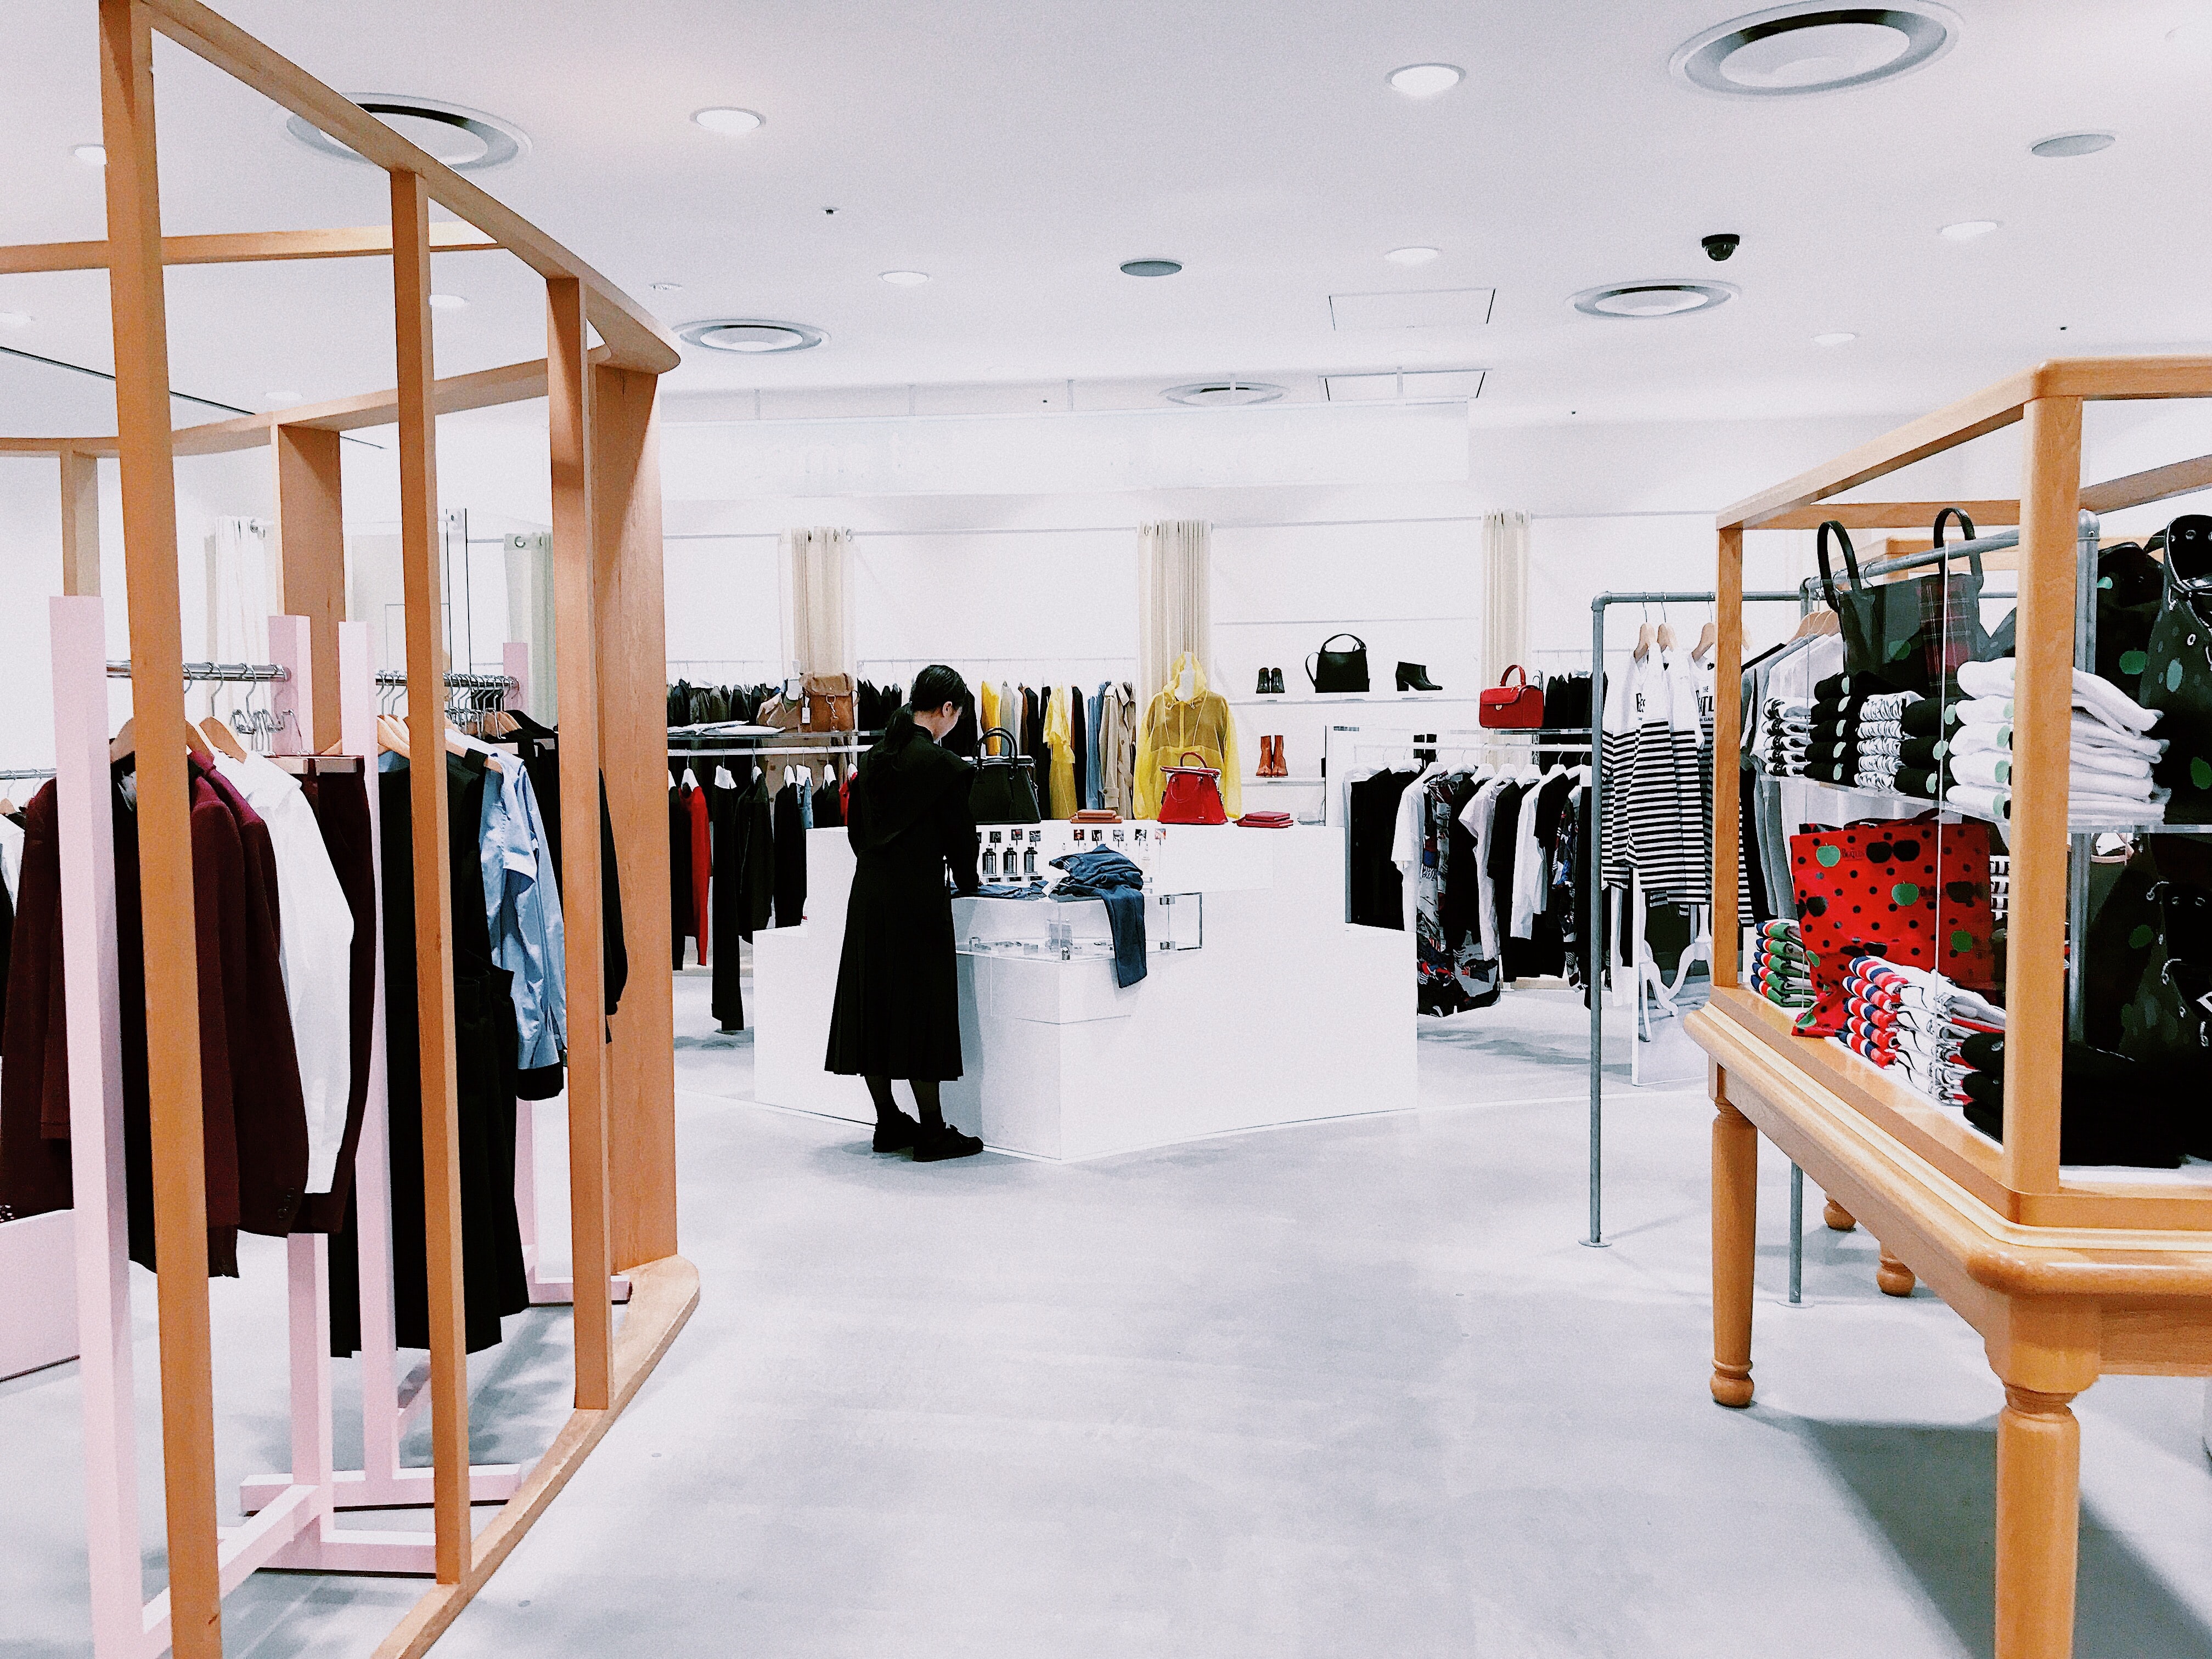 RETHINKING THE BASIS OF RETAIL WHEN LAUNCHING A POP-UP